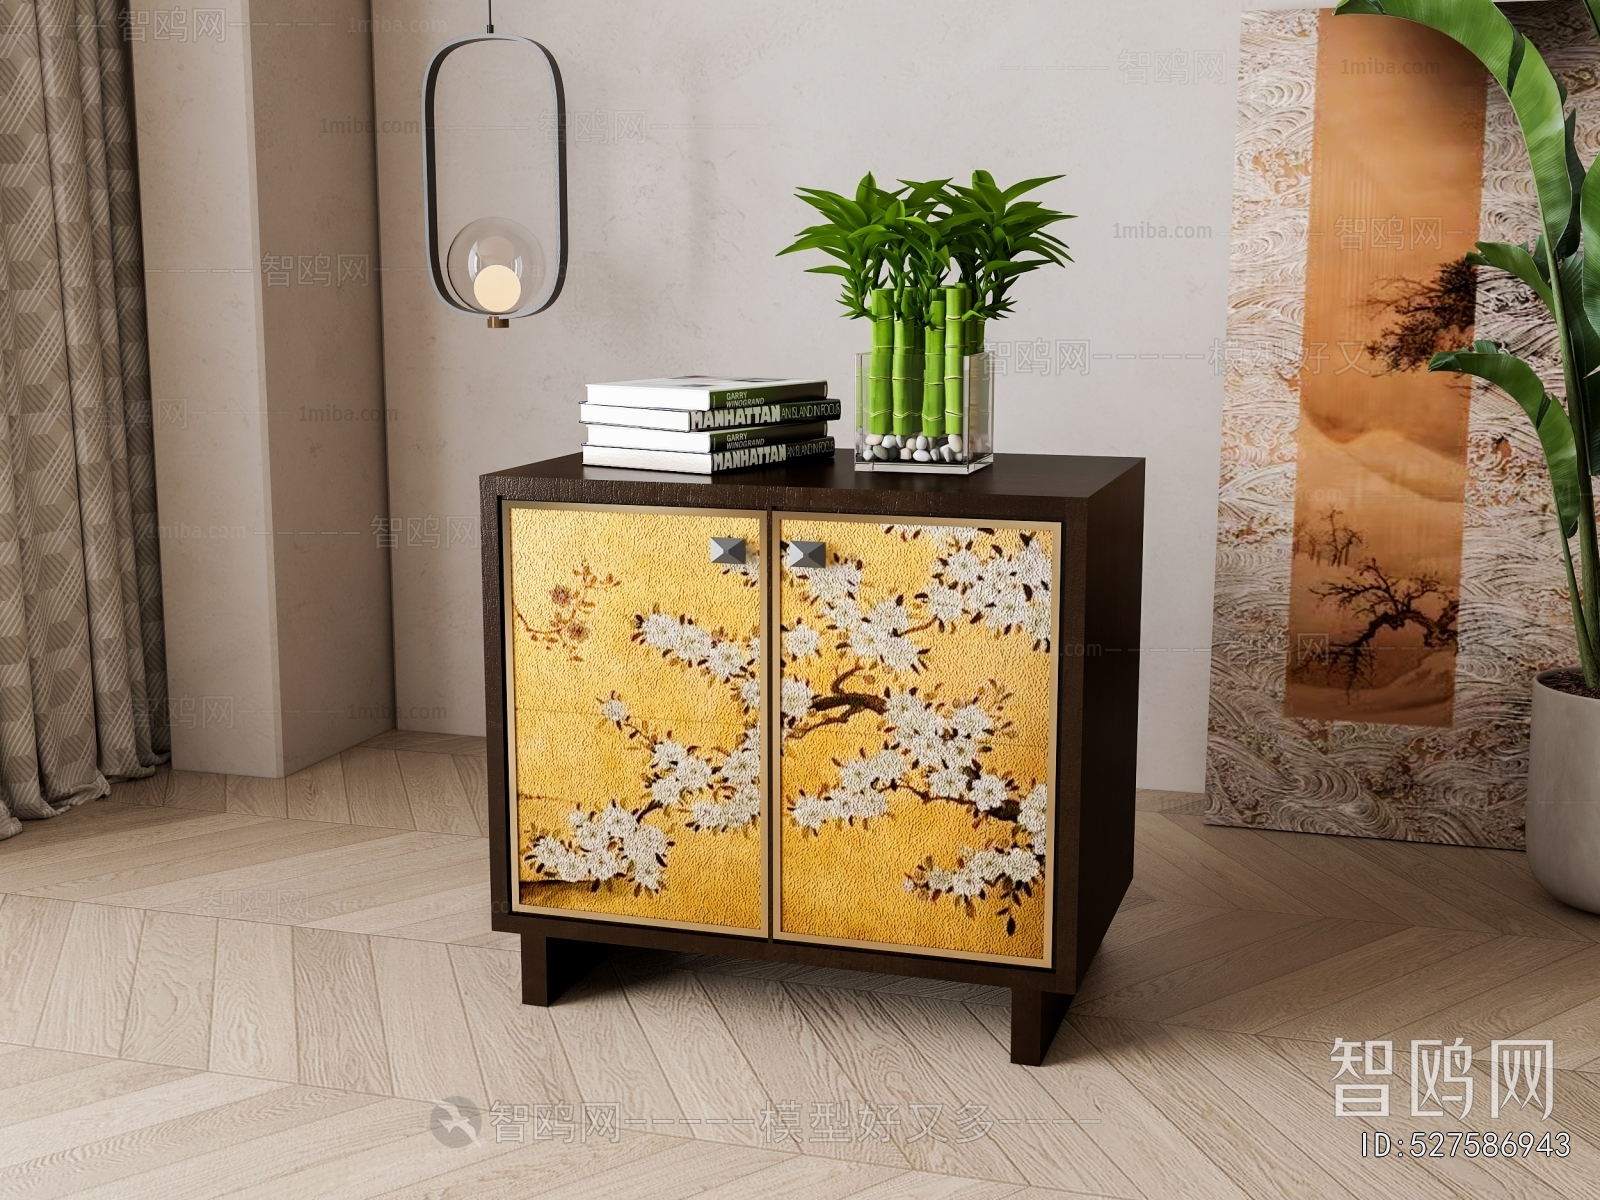 New Chinese Style Bedside Cupboard